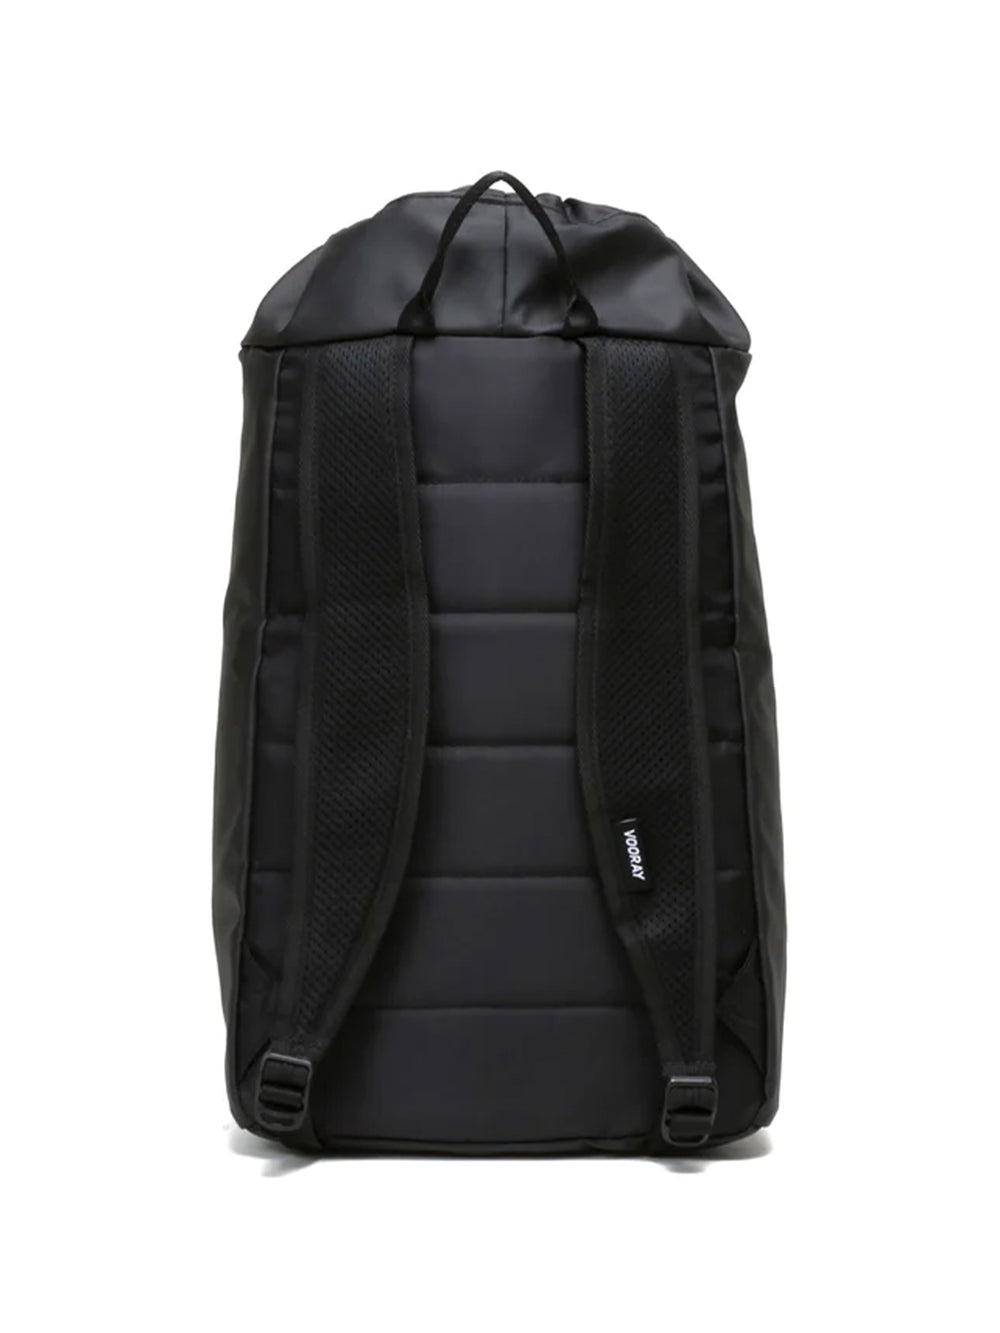 [VOORAY] ブーレイ ストライド シンチ バックパック STRIDE CINCH BACKPACK ／ リュックサック